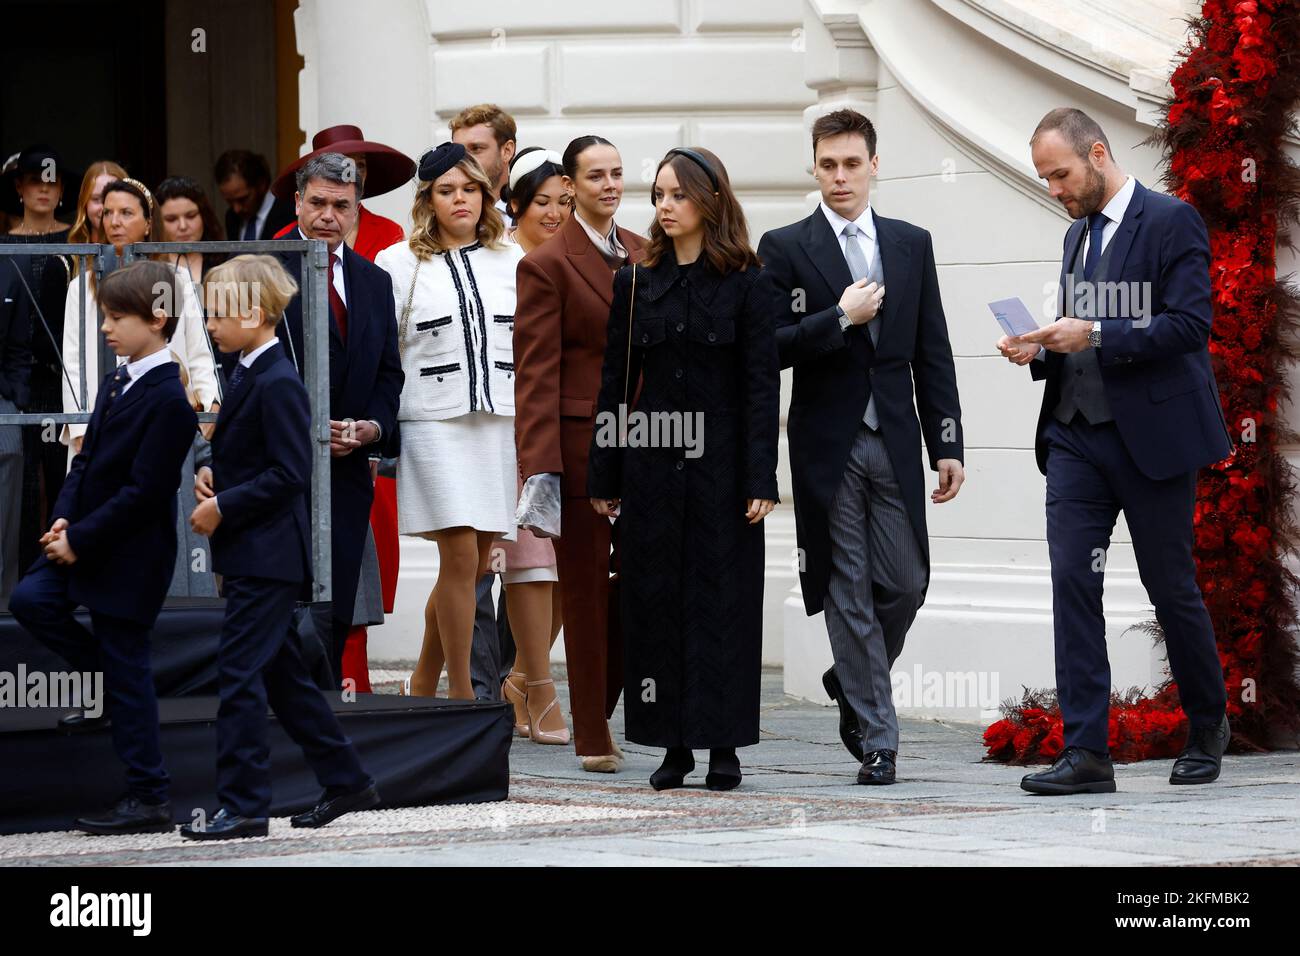 Louis Ducruet, Alexandra of Hanover, Pauline Ducruet and guests arrive to attend celebrations marking Monaco's National Day at the Palace in Monaco, November 19, 2022. REUTERS/Eric Gaillard/Pool Stock Photo